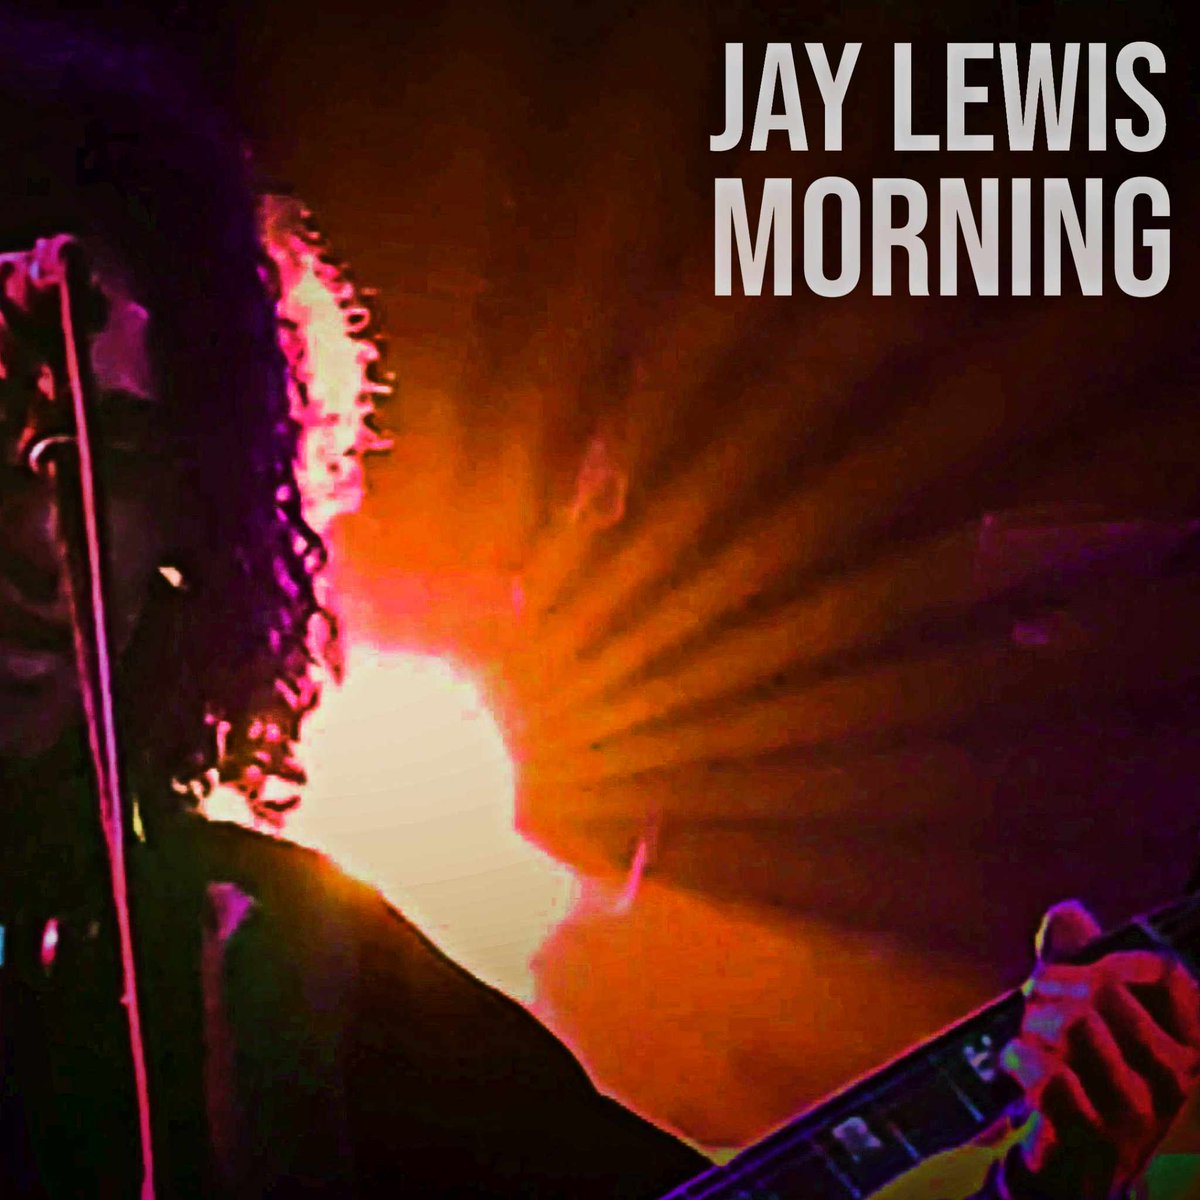 The Video for my track 'Morning' will be played on my Facebook page at 5pm today,,, JL #waitingfortheworld facebook.com/JayLewisMusic